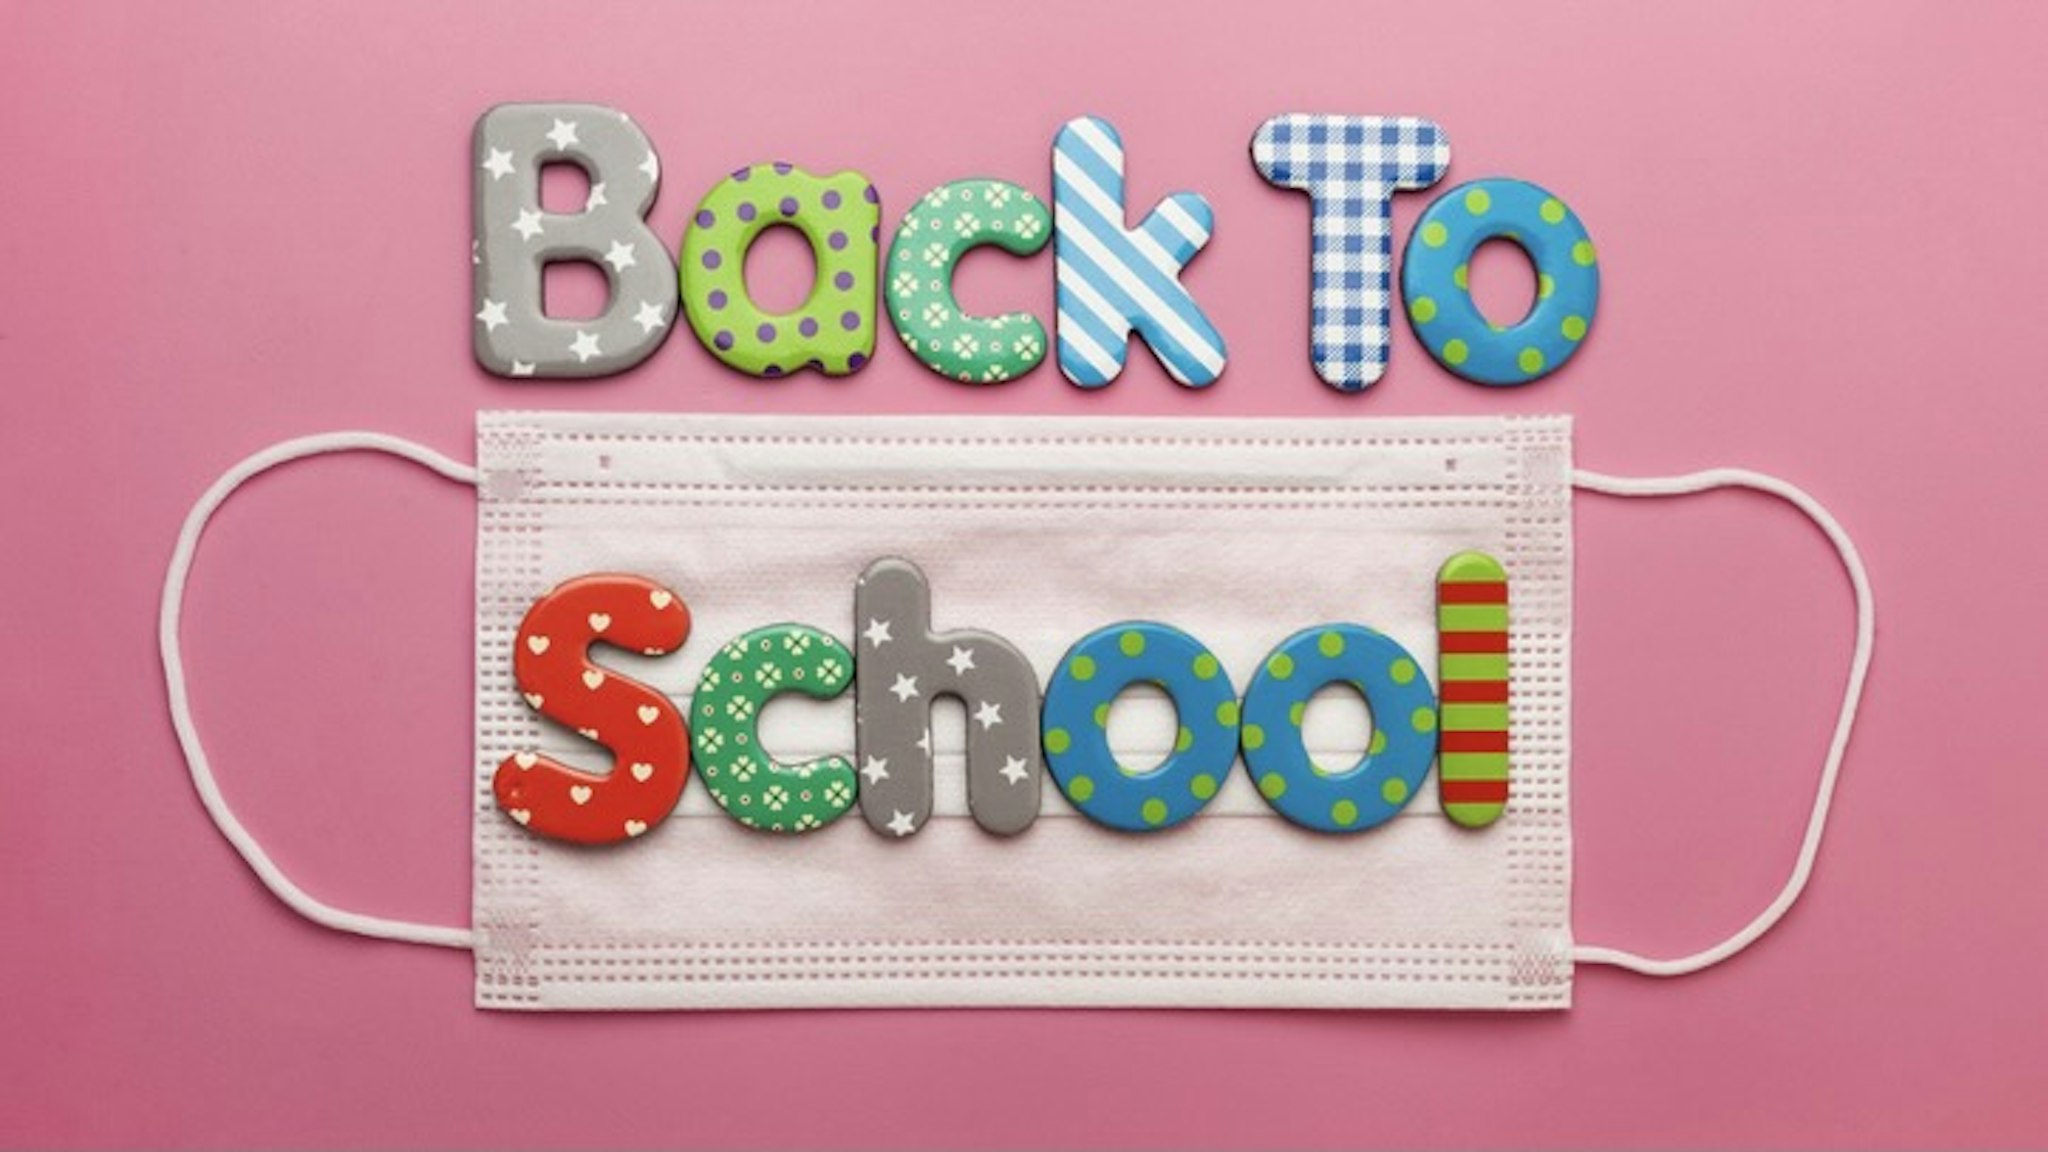 Colourful Back To School Concept Top View - stock photo Covid-19 facemask featuring colourful children's letters in a conceptual top view shot Photography by Andrew Katsaitis via Getty Images